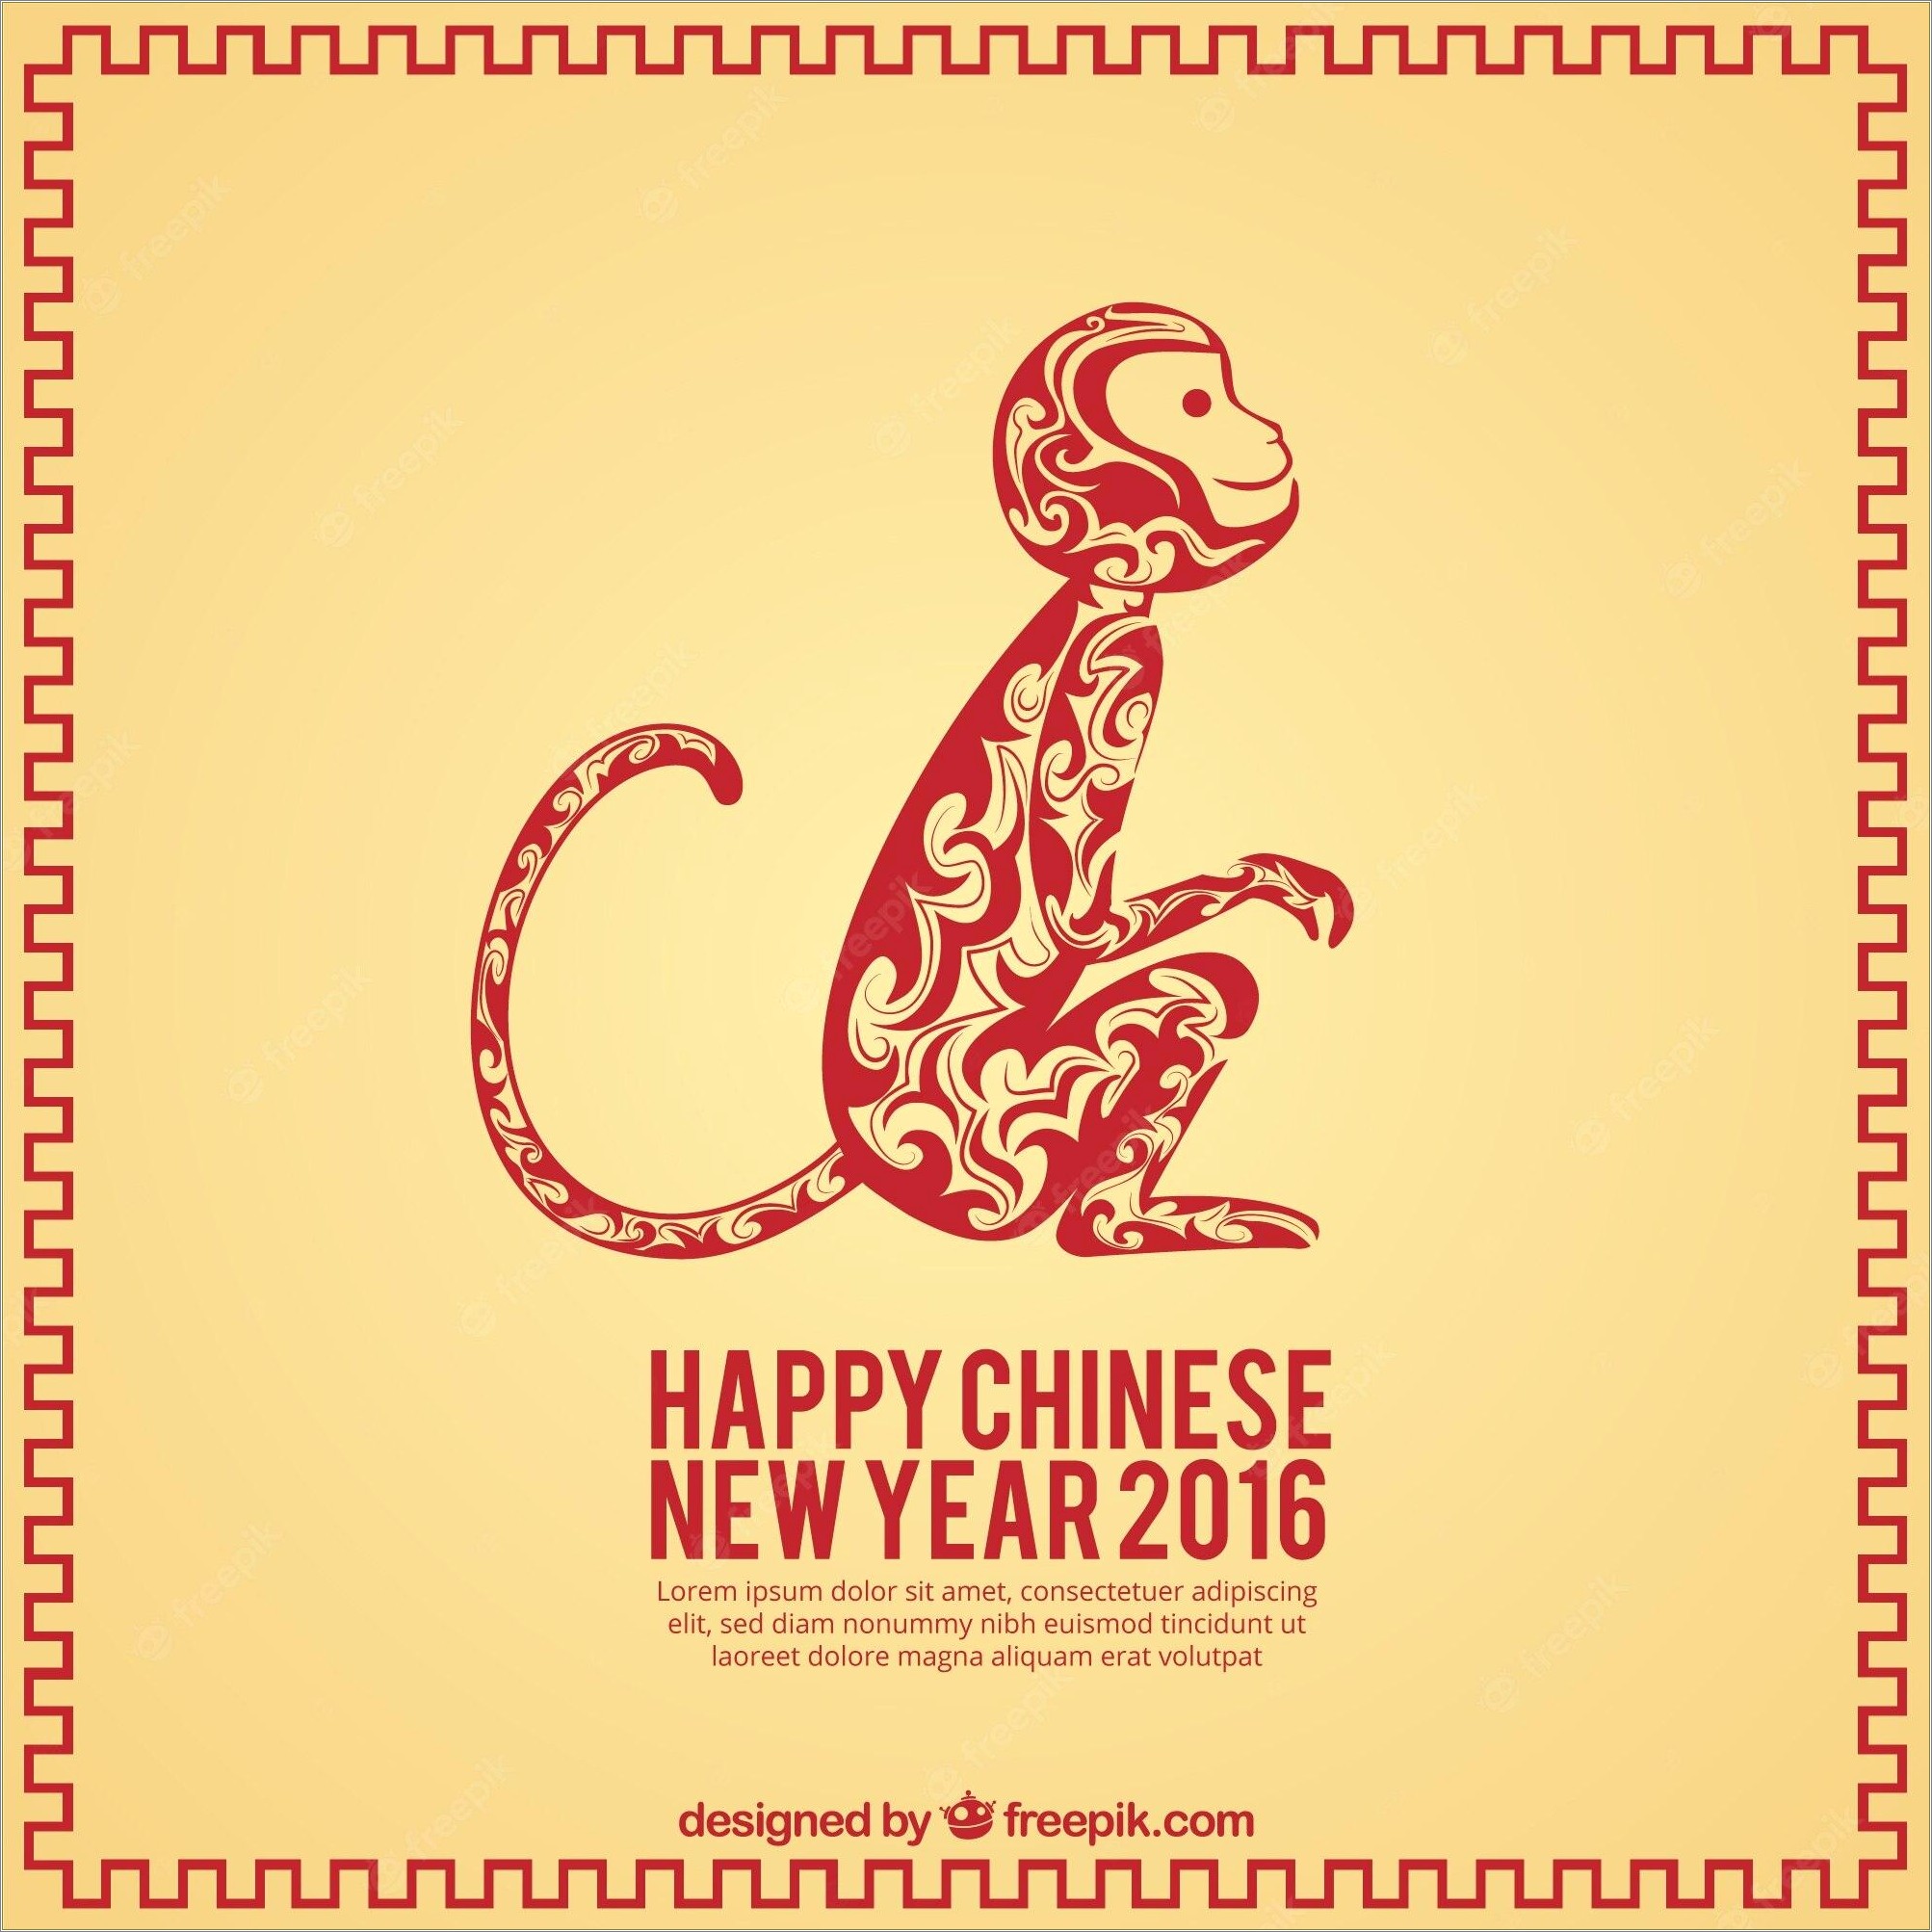 Chinese New Year 2016 Free Invitation Template